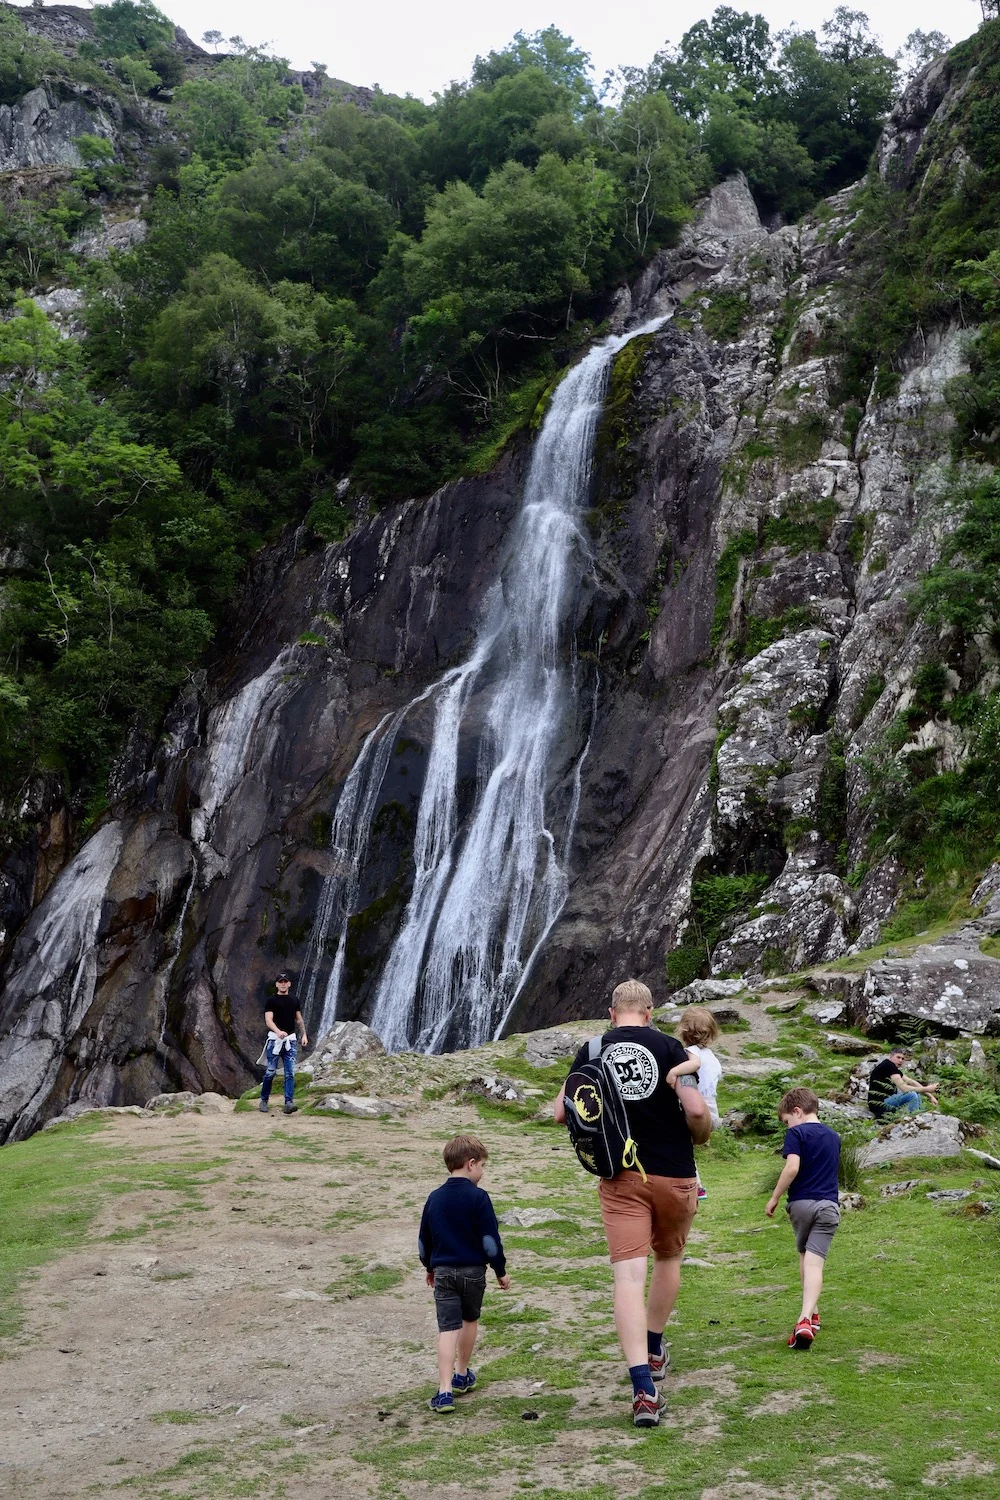 Is it busy at Aber Falls